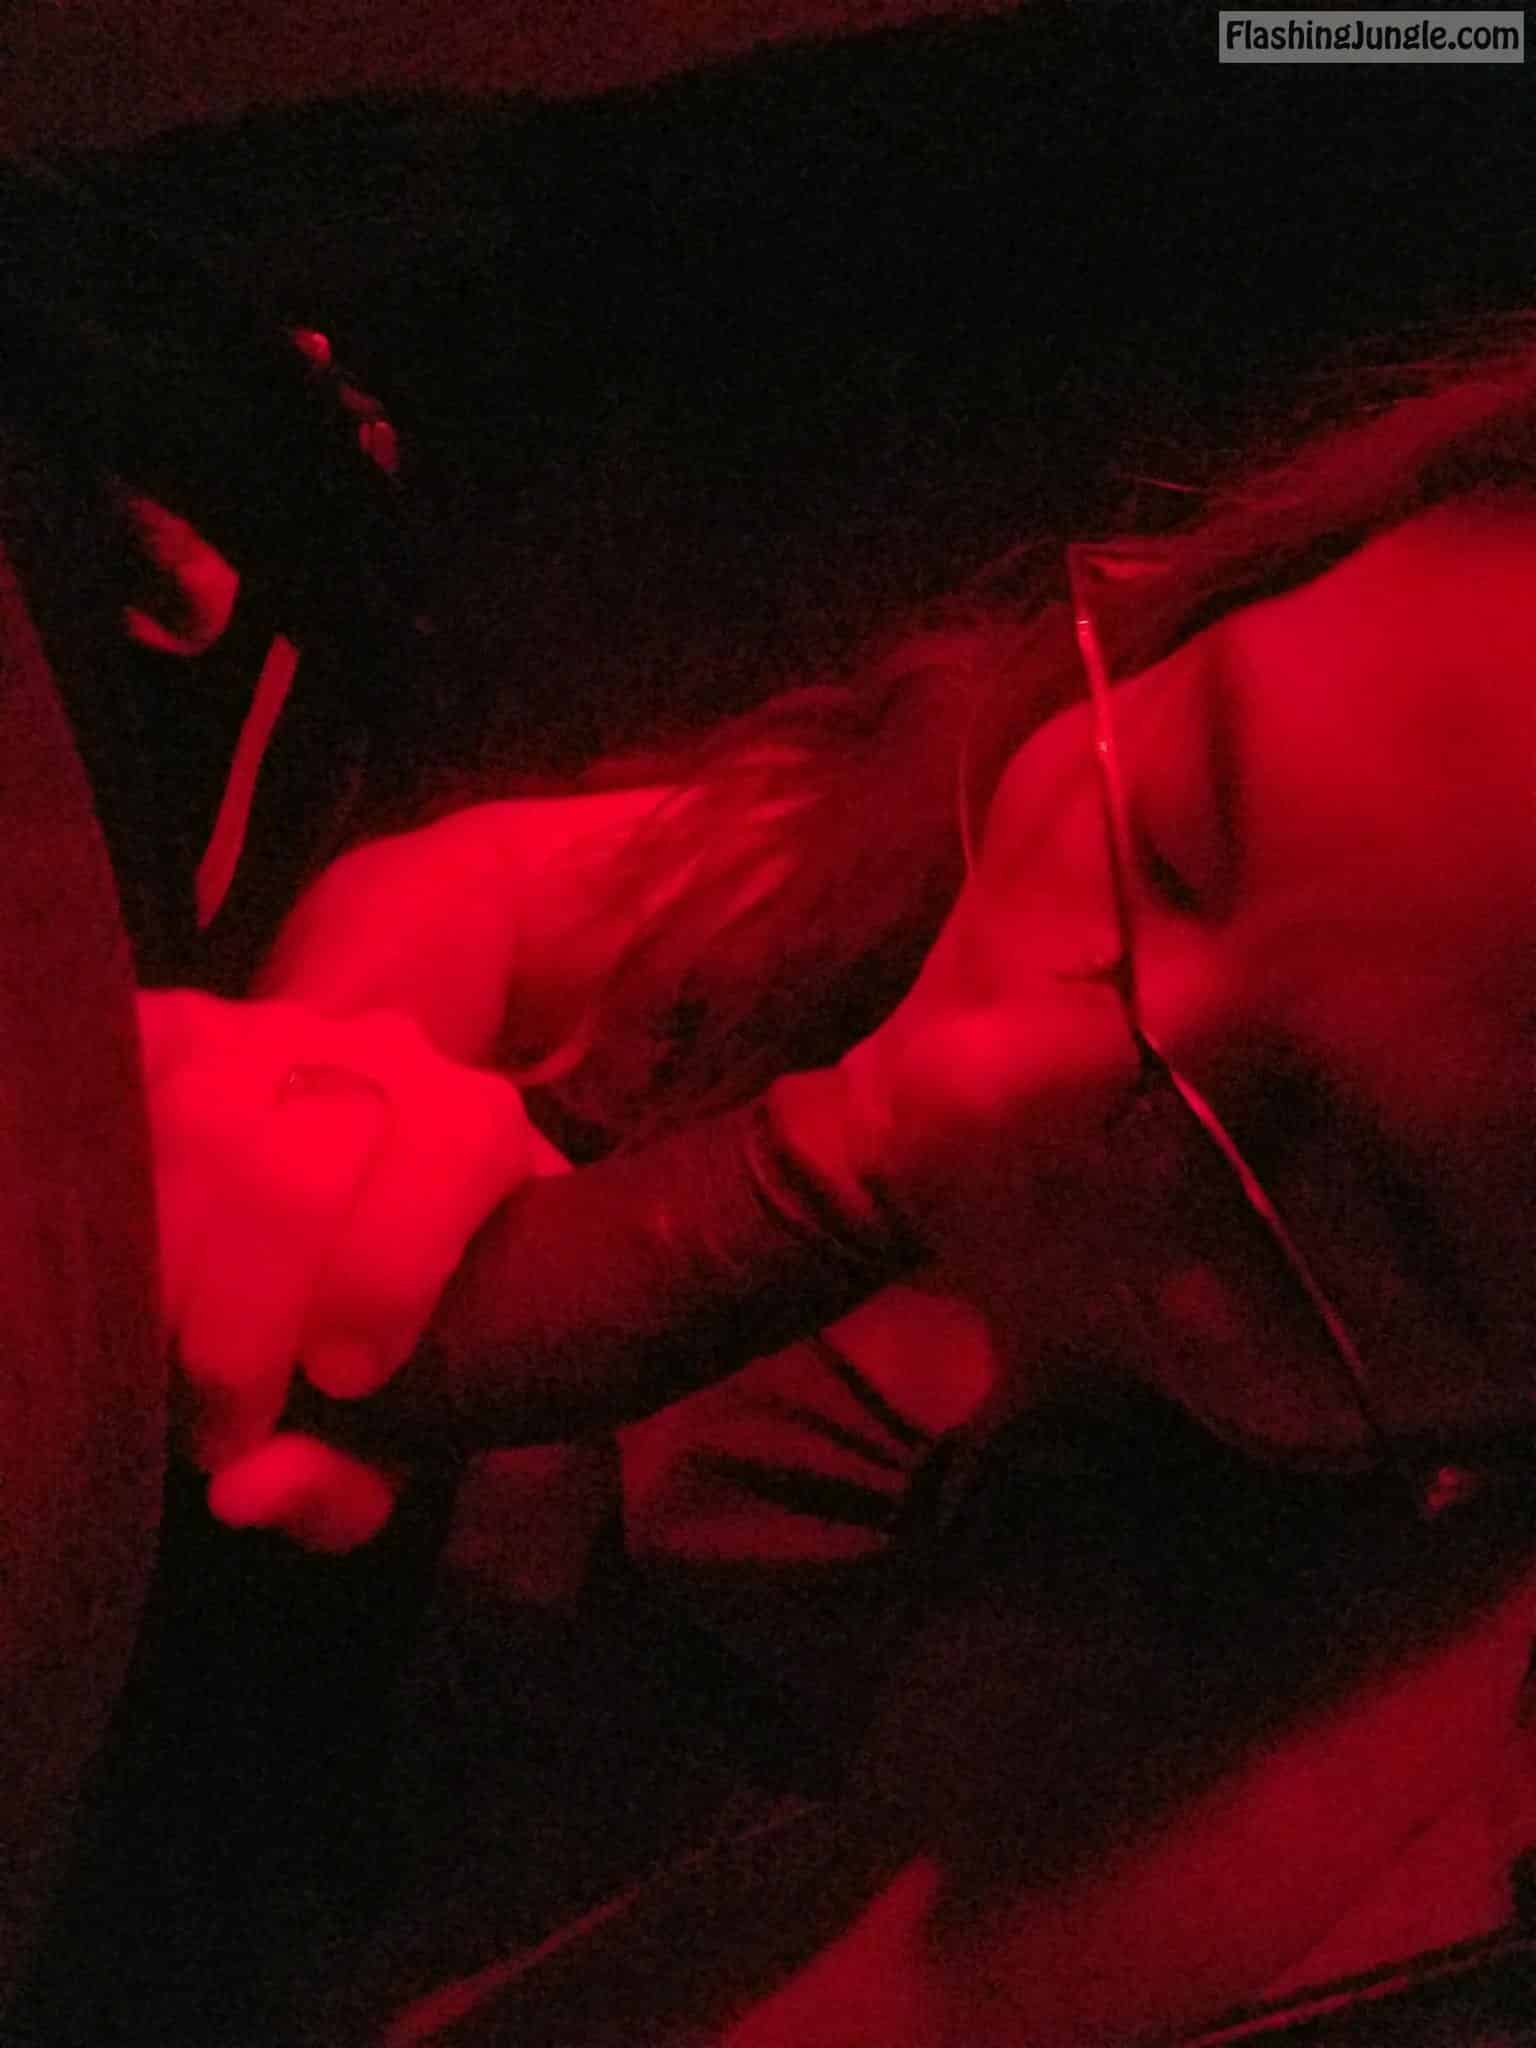 hotwife galleries - Hotwife Blowjob Under Redlight POV Hotwife with glasses sucking black cock under redlight. - Hotwife Pics